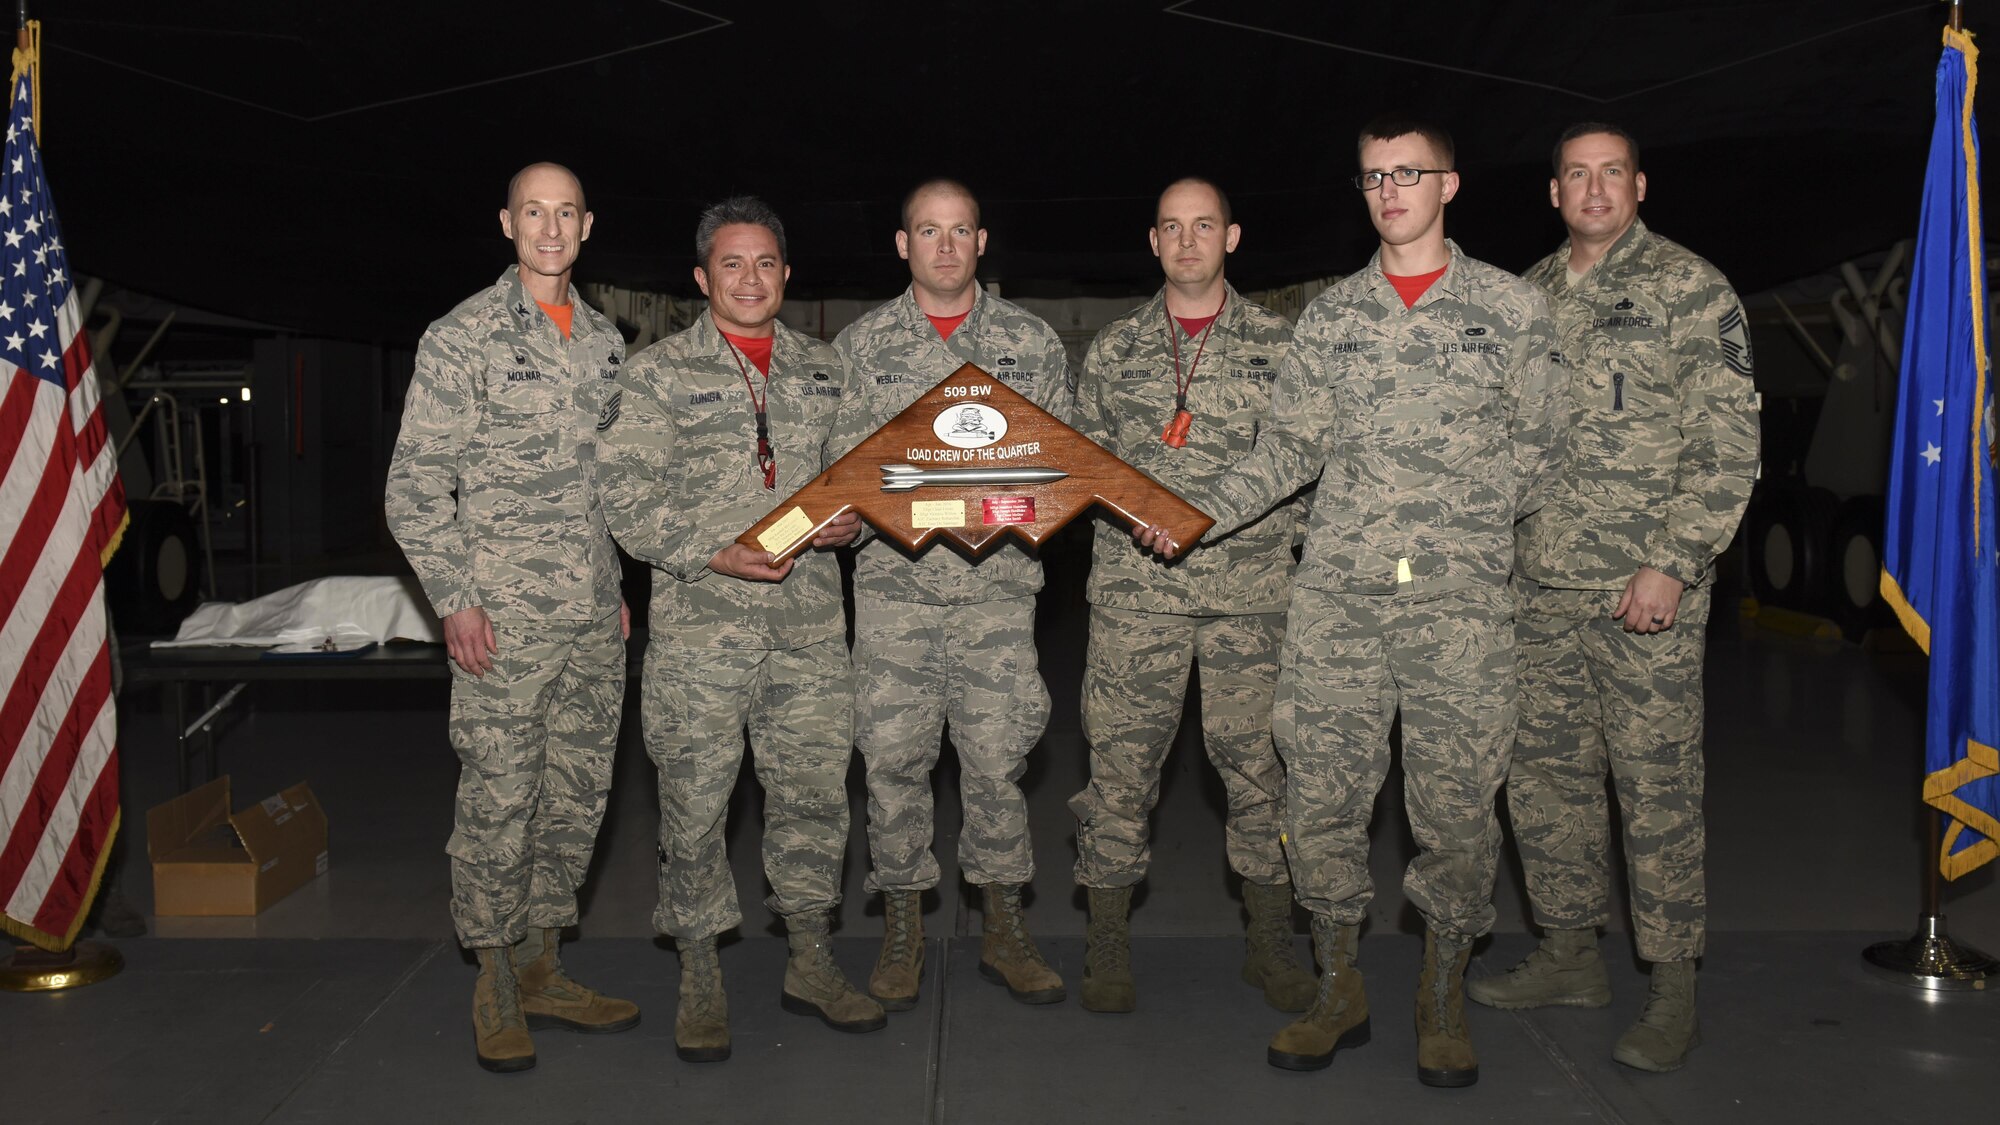 Members of the 131st Aircraft Maintenance Squadron (AMXS) are presented with the 509th MXG Load Crew of the Quarter award for winning the fourth quarter load competition at Whiteman Air Force Base, Mo., Jan. 6, 2017. The 131st AMXS won with a time of 30 minutes 30 seconds, and zero discrepancies noted.